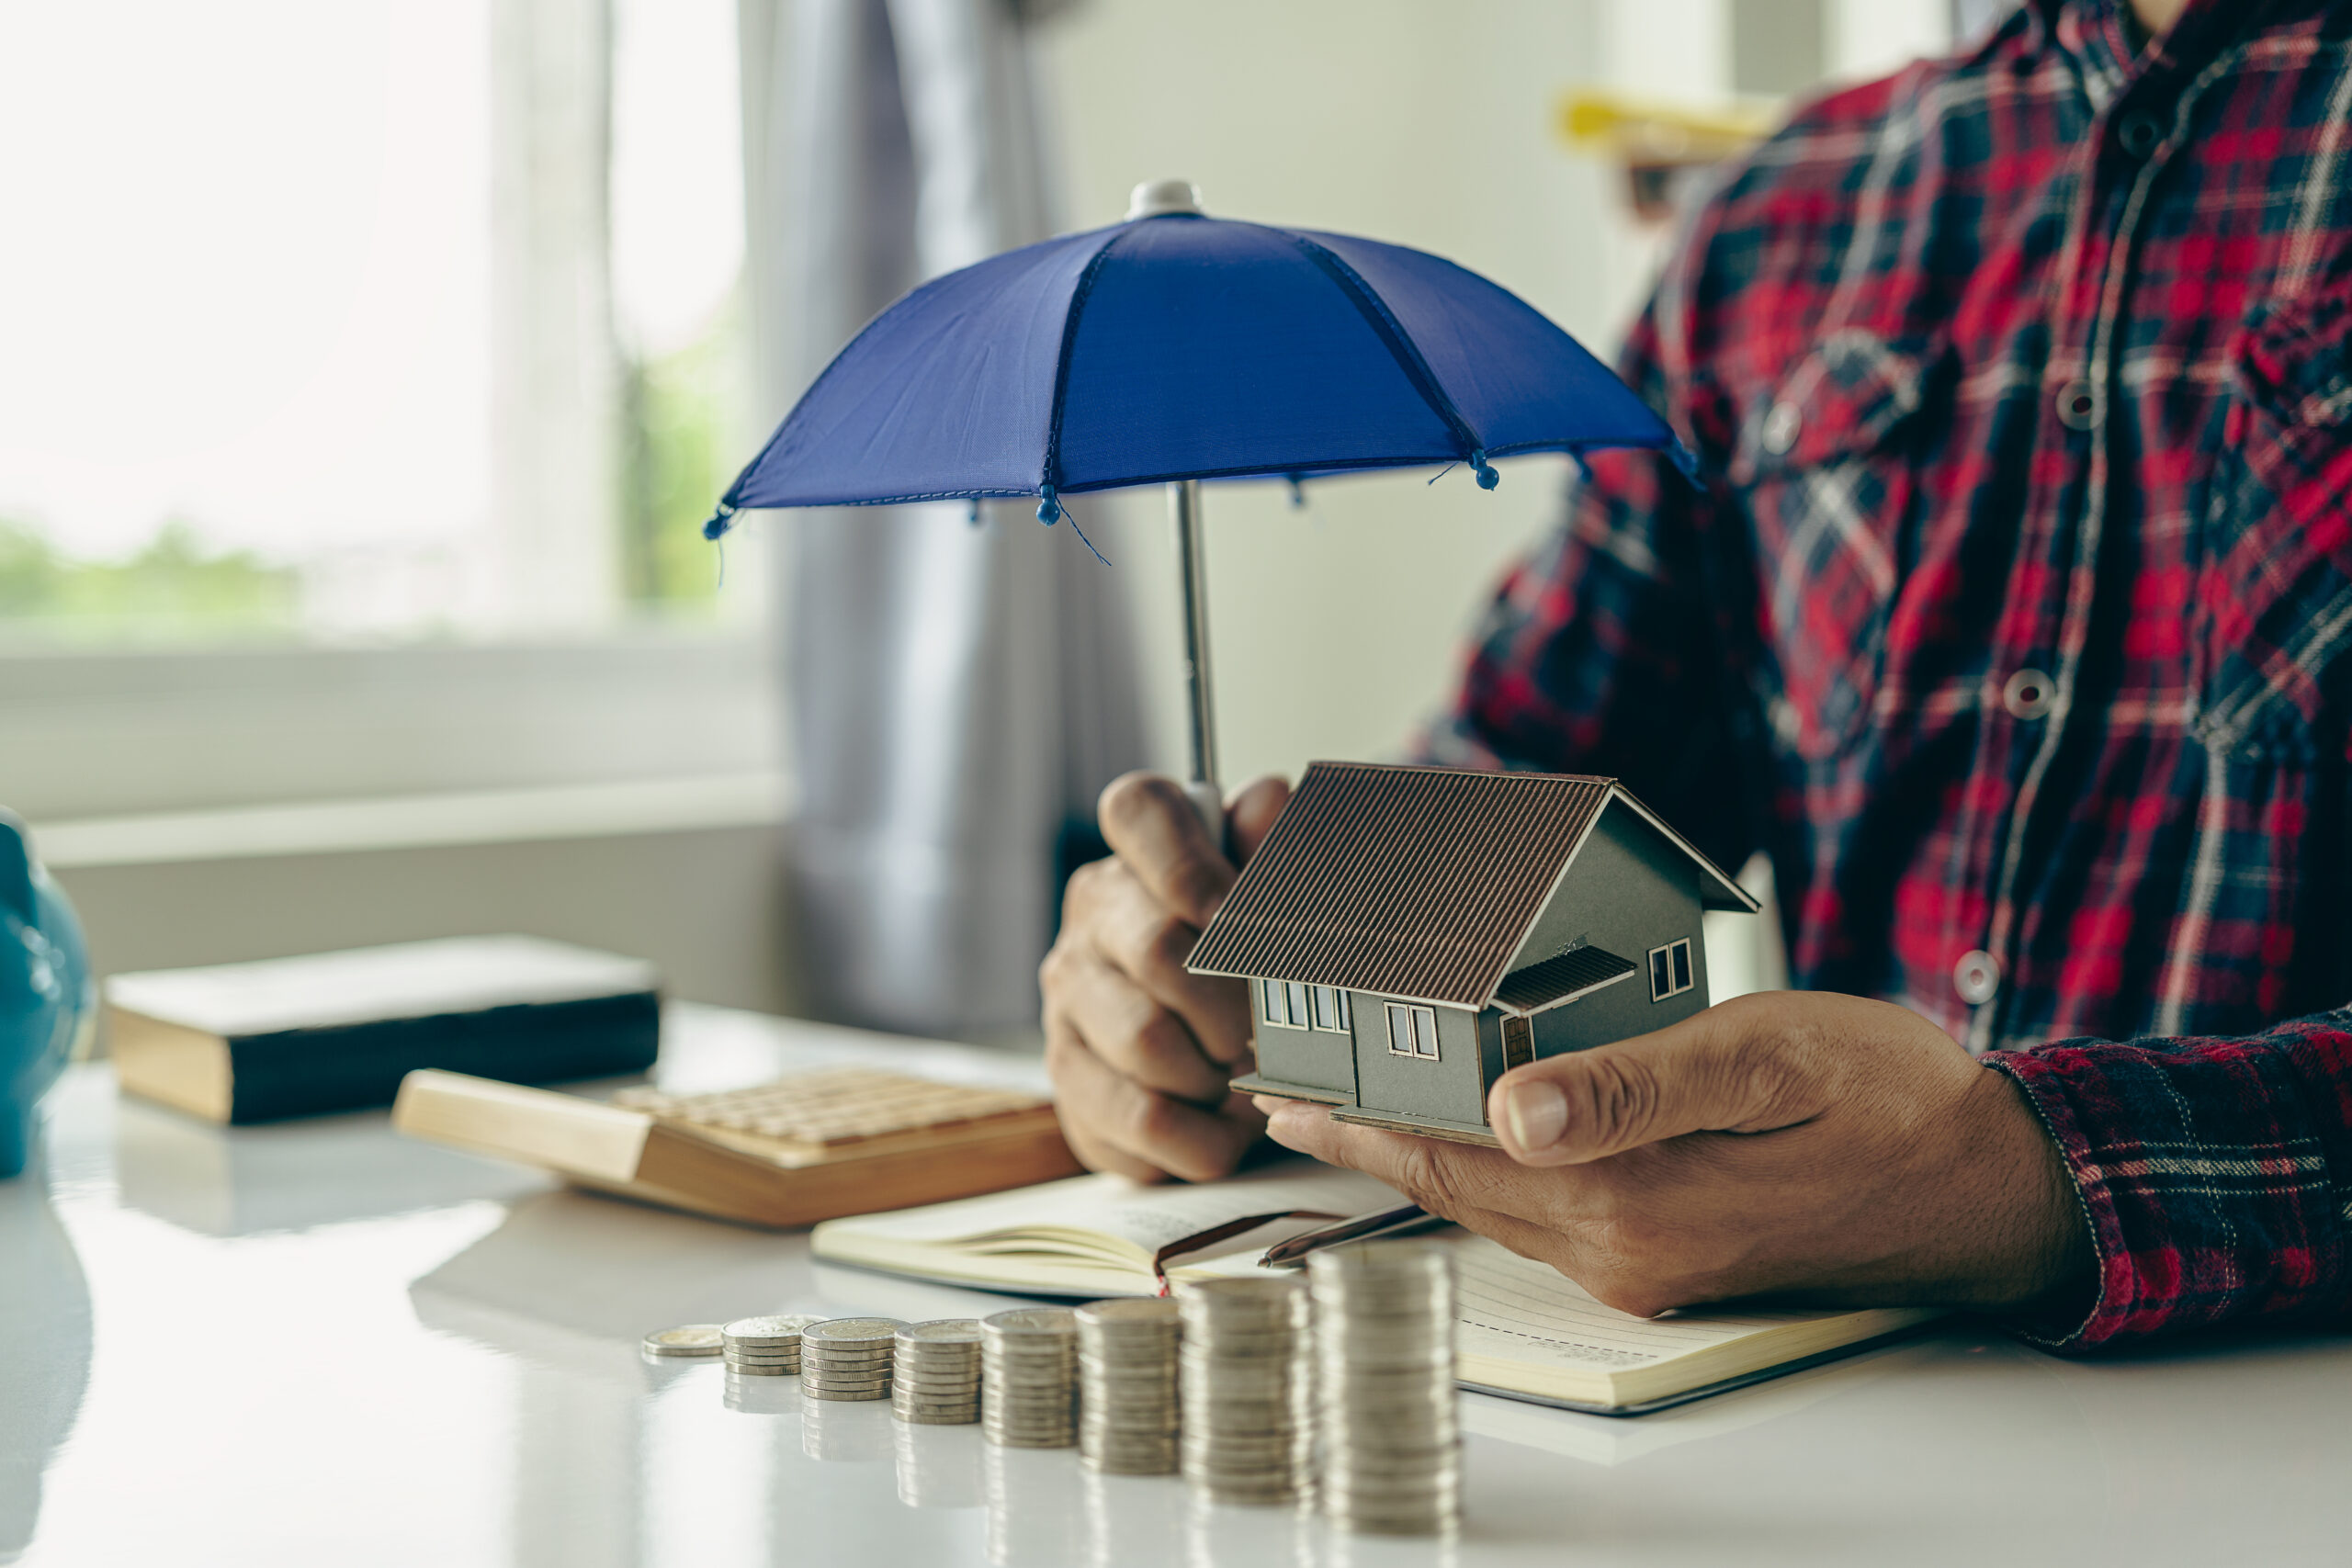 Man holding a blue umbrella and a house Insurance agent holds blue umbrella over modern house model Property insurance Home insurance concept Close-up pictures